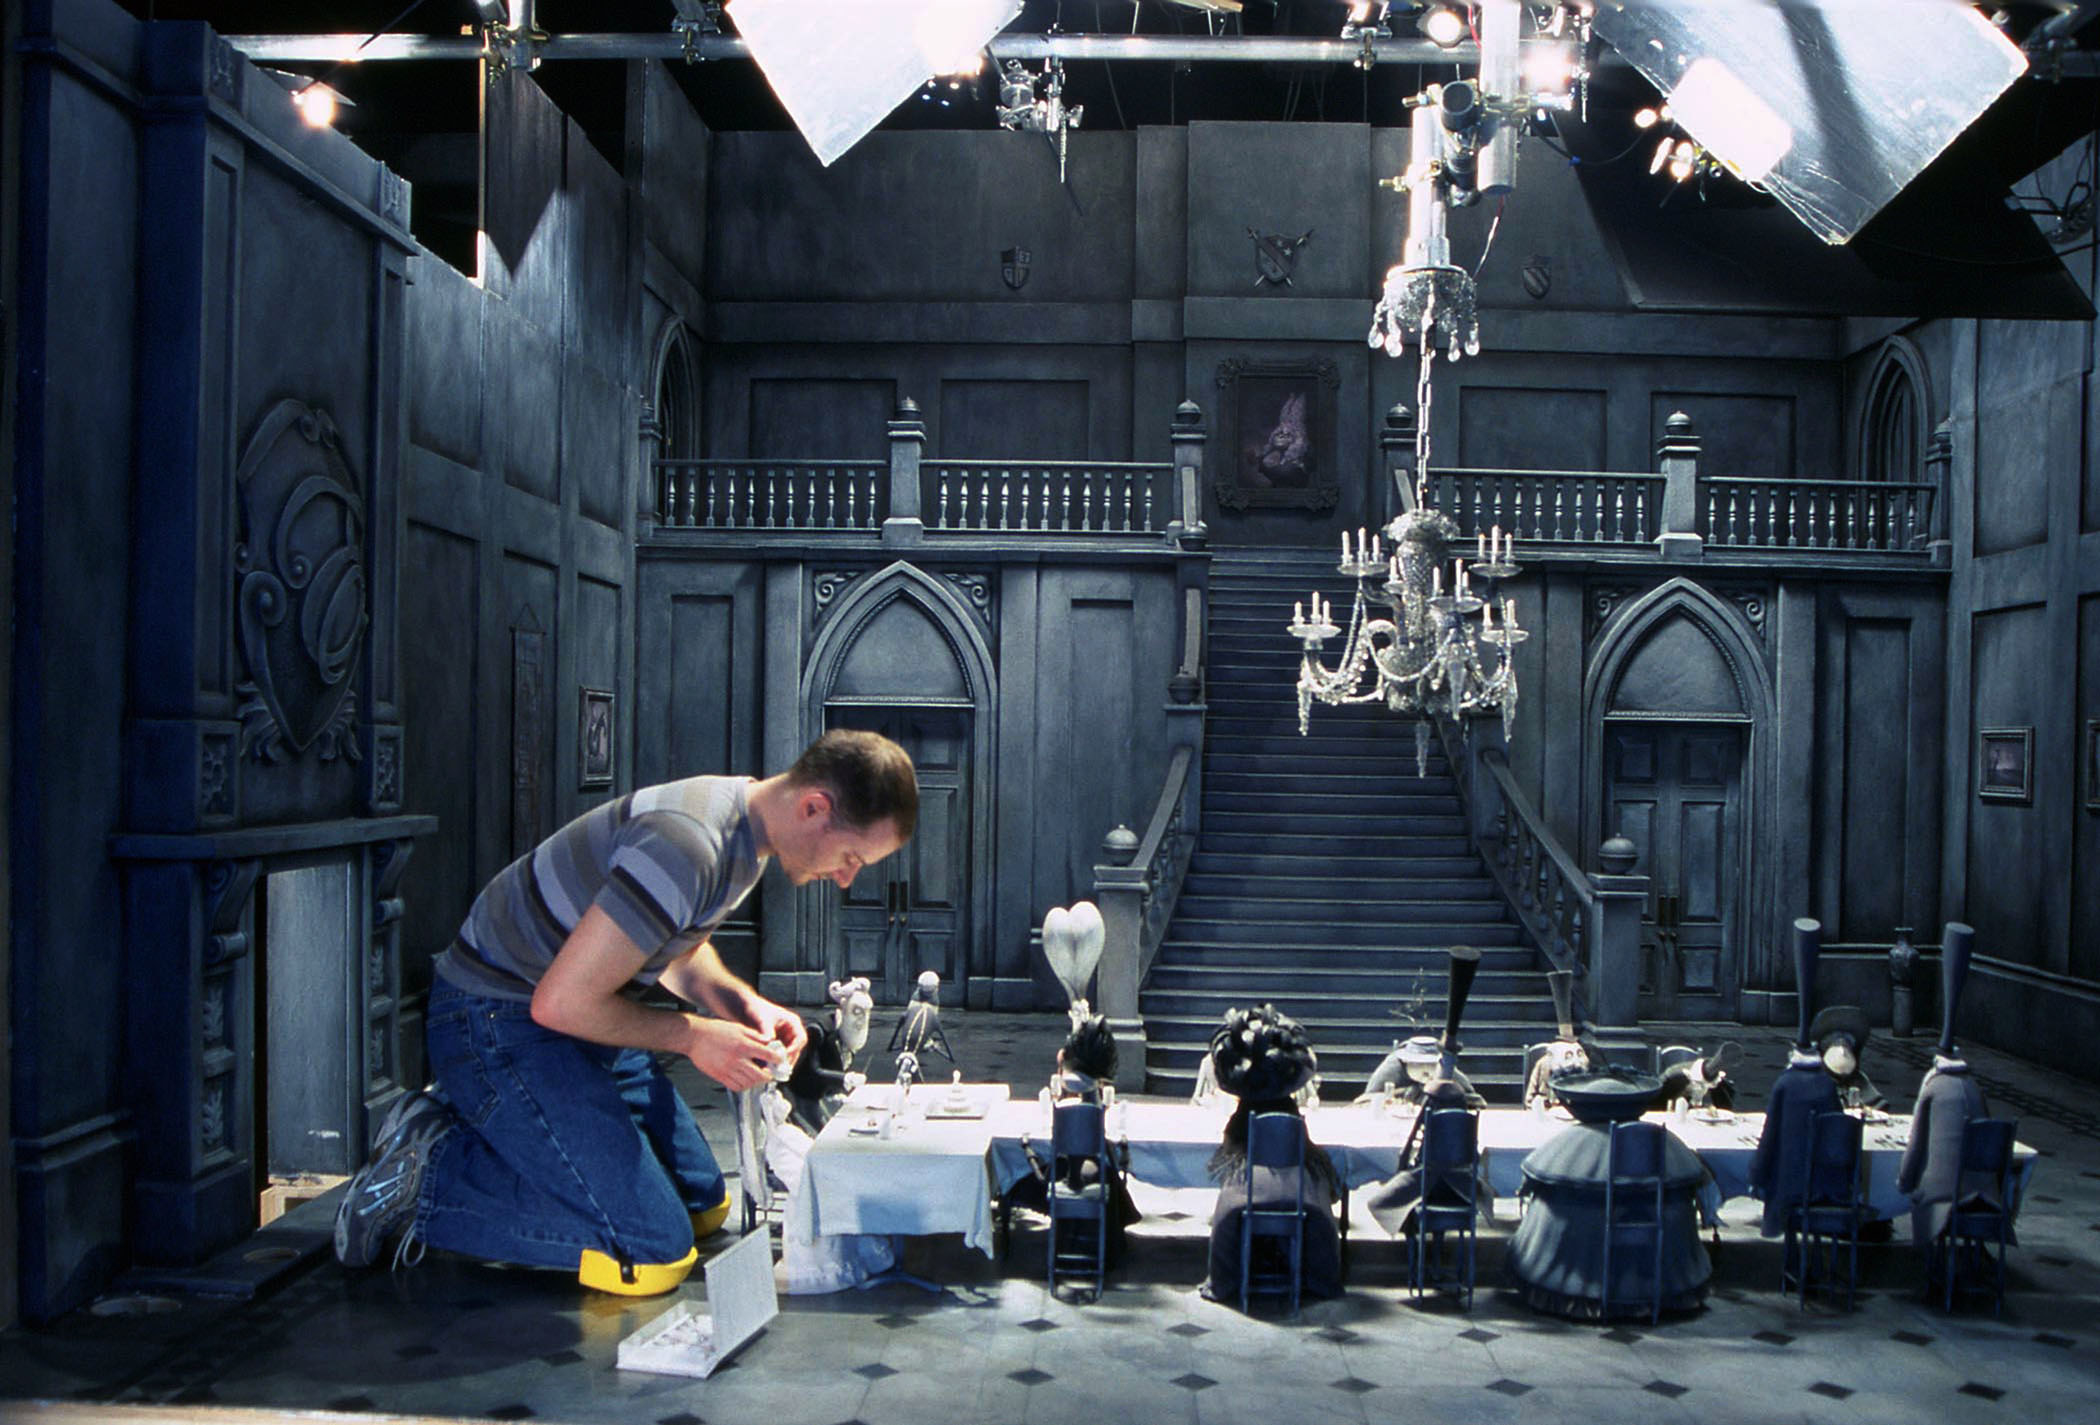 A stop motion animator on the set of corpse bride